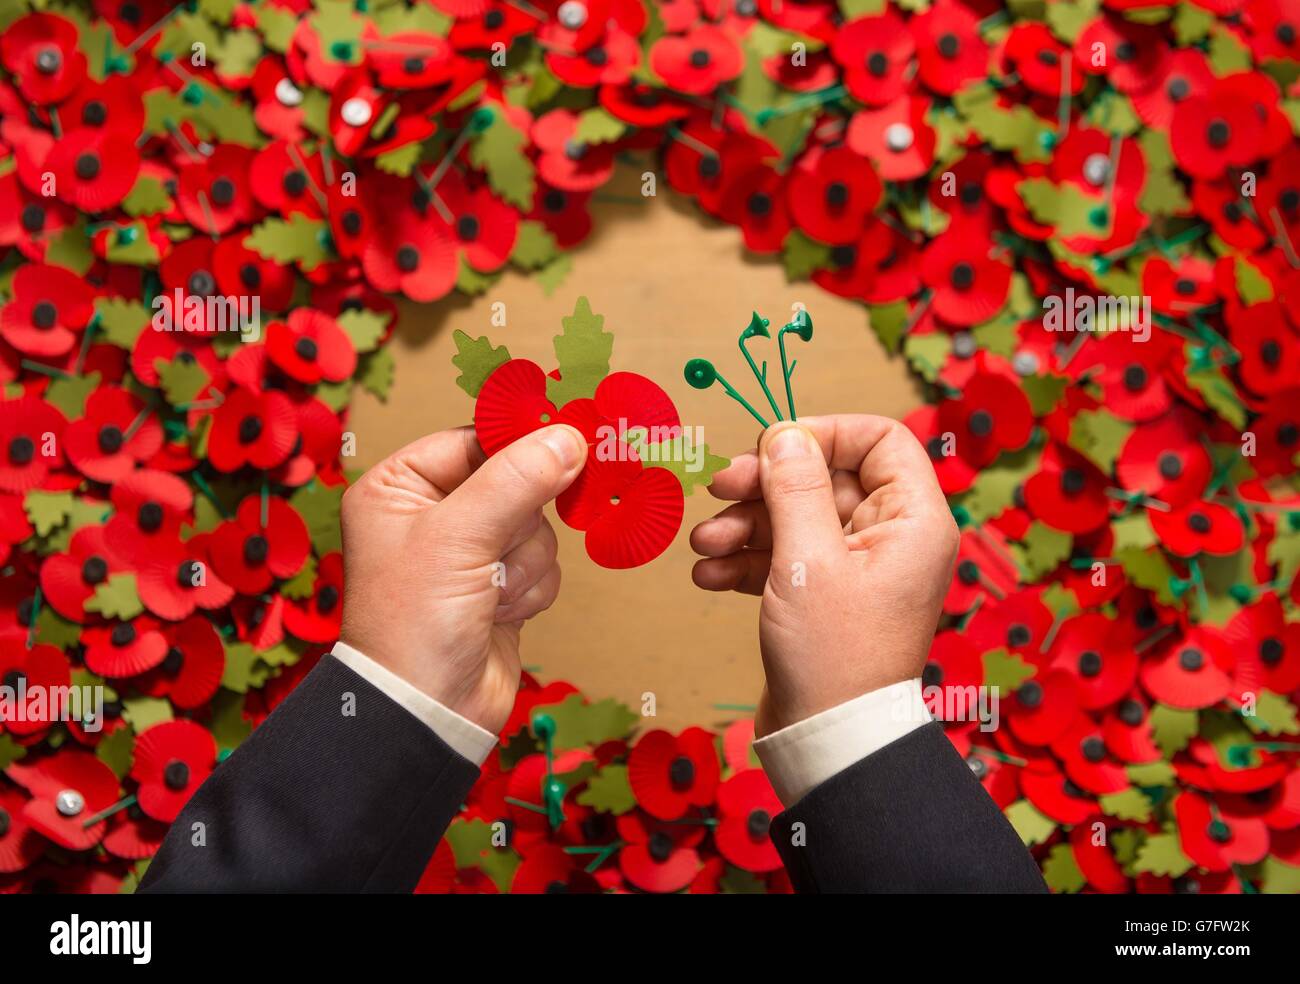 Army veteran Shane Crowhurst pieces together a paper poppy at the Royal British Legion Poppy Appeal in Aylesford, Kent, which is one of the thousands of paper poppies that will be recycled through Sainsbury's after Armistice Day this year. Stock Photo